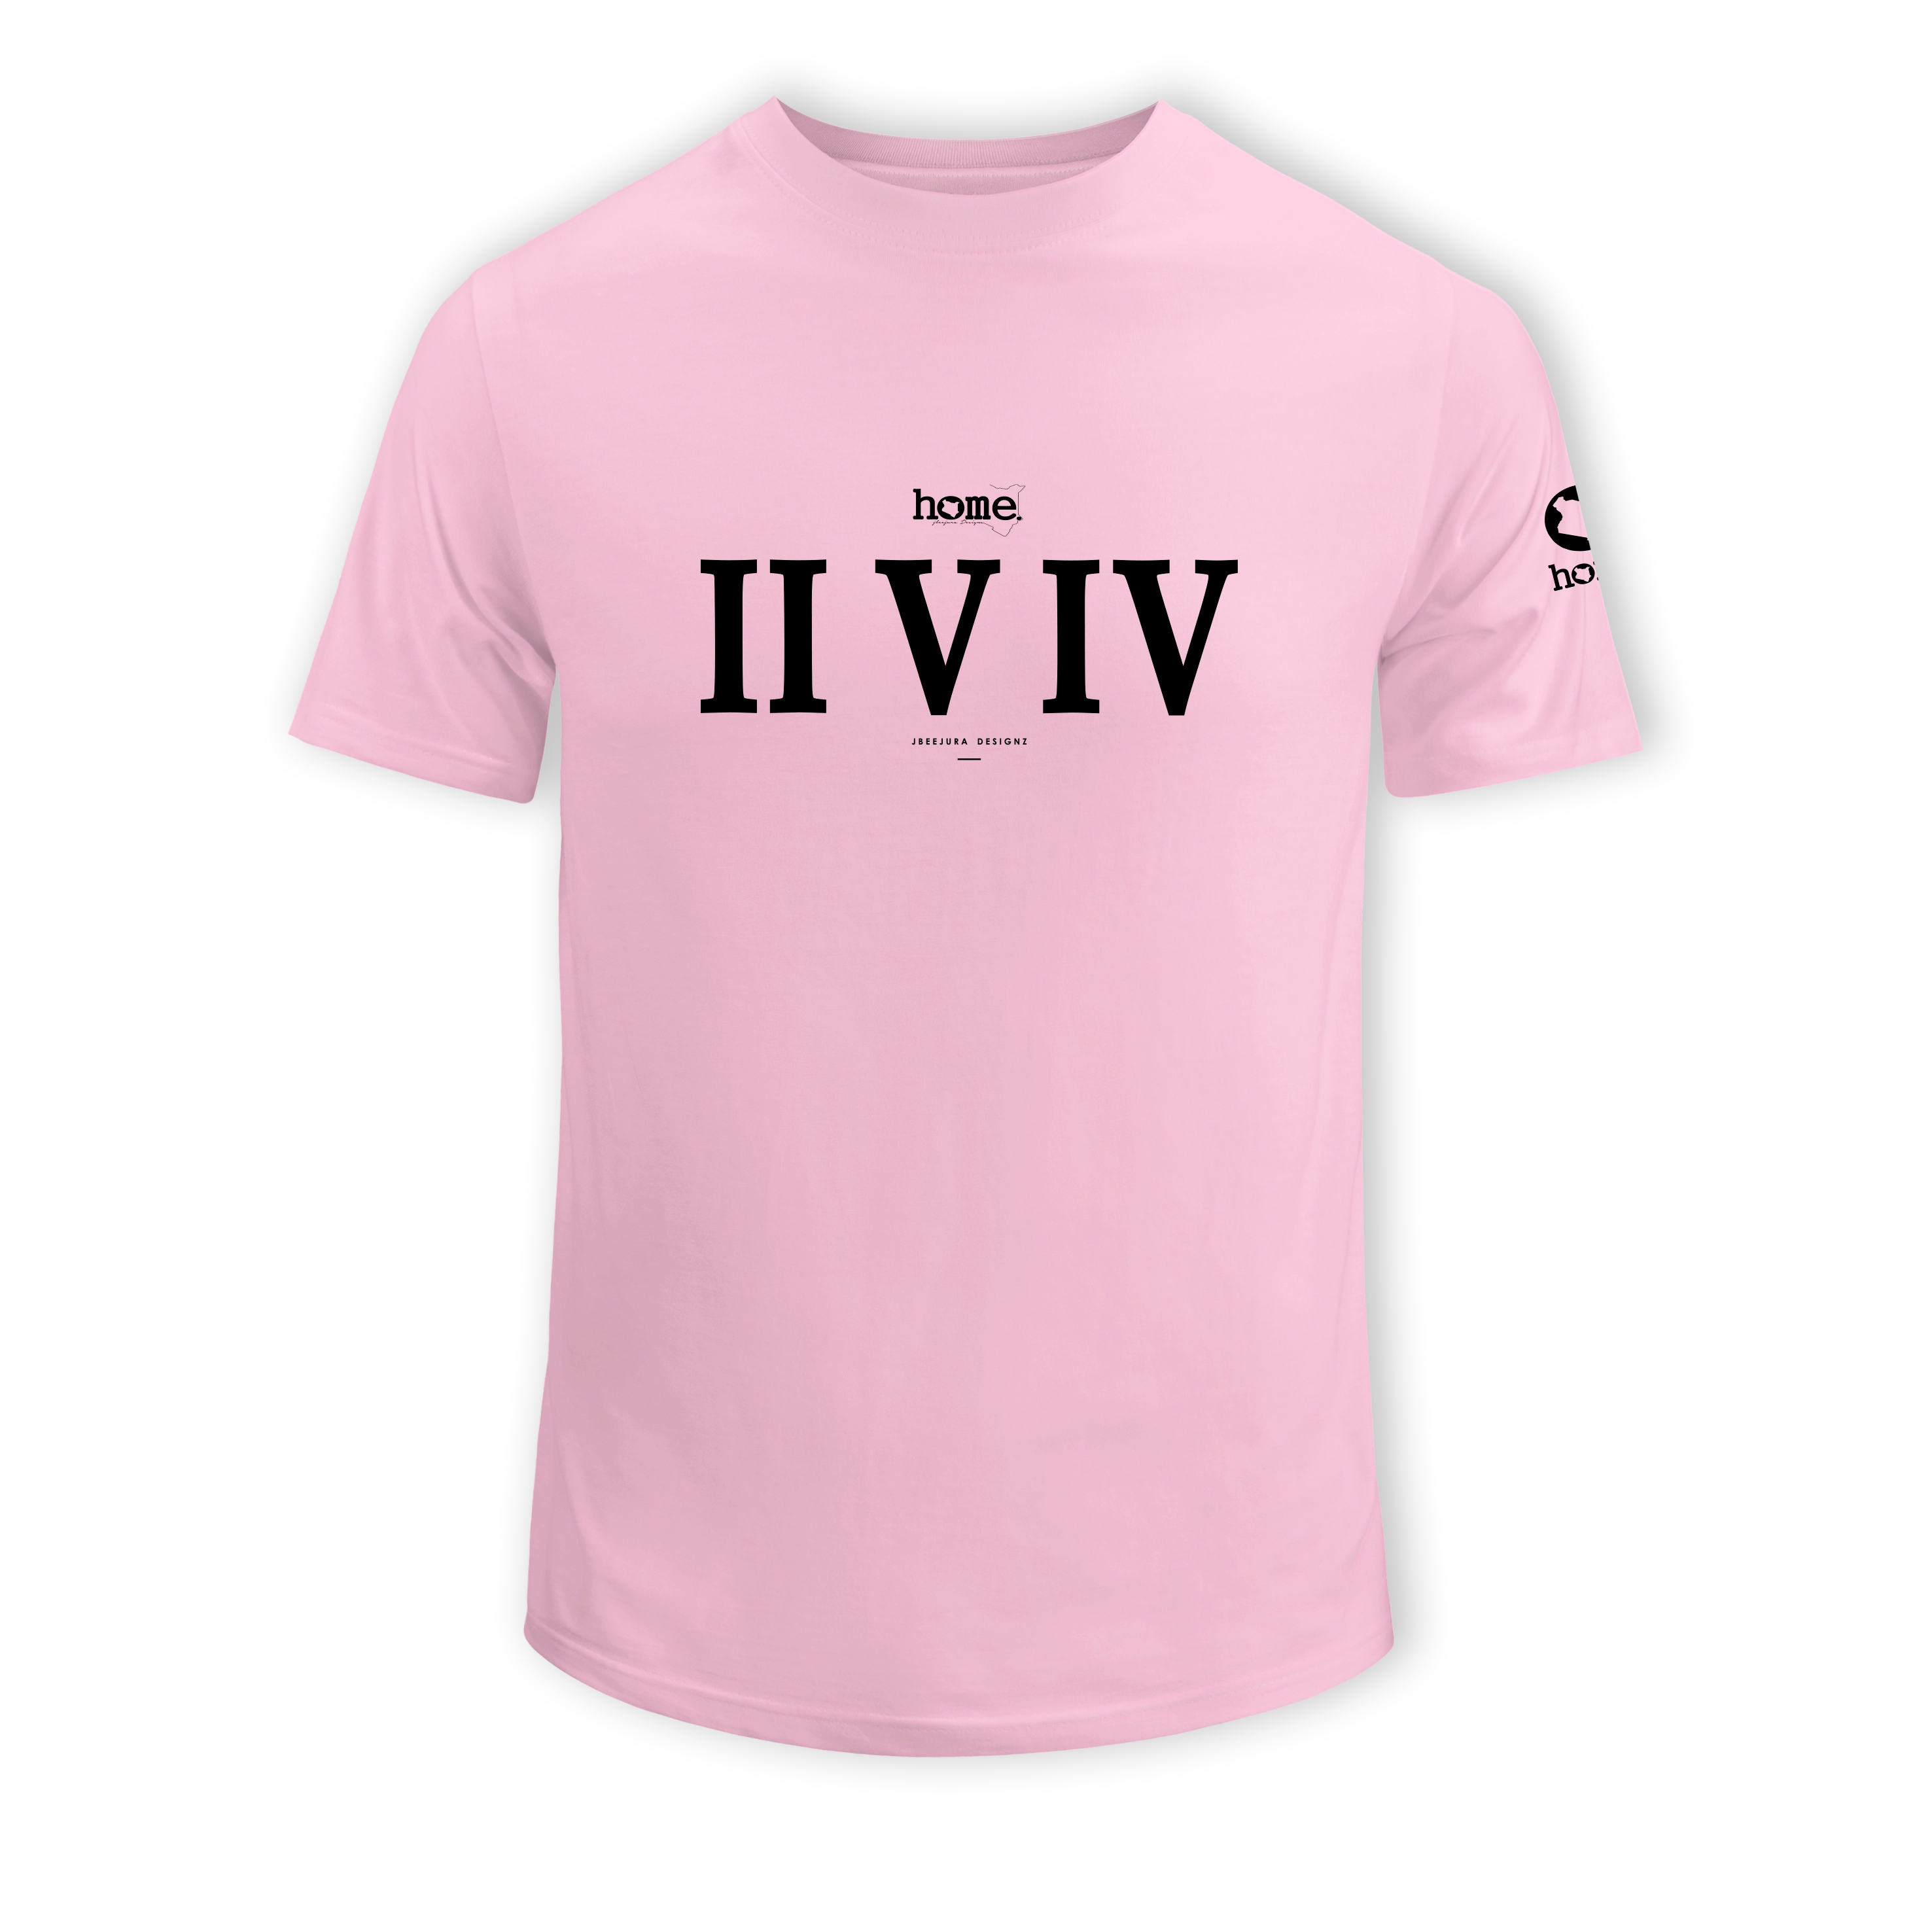 home_254 KIDS SHORT-SLEEVED PINK T-SHIRT WITH A BLACK ROMAN NUMERALS PRINT – COTTON PLUS FABRIC